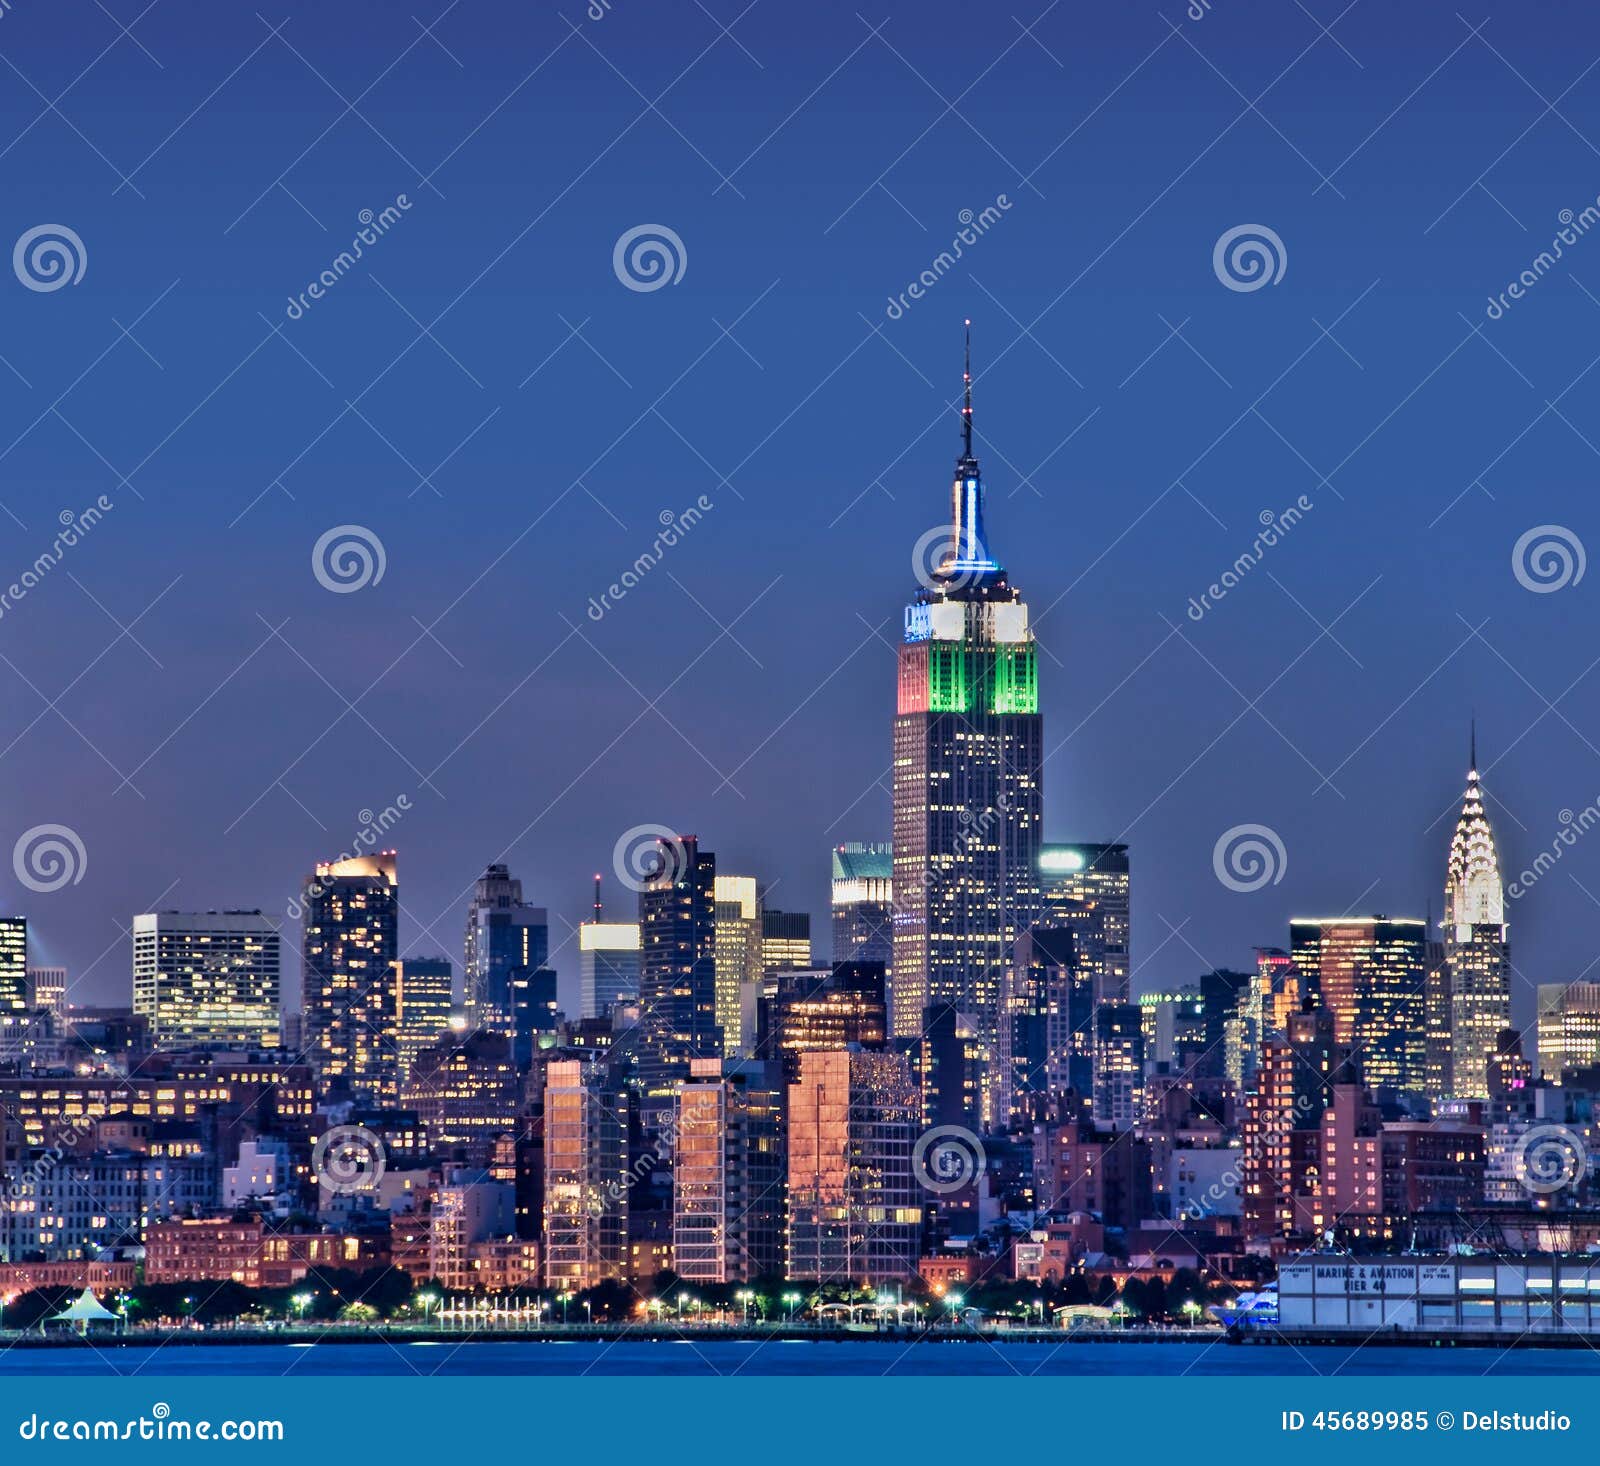 new york skyline with the empire state building